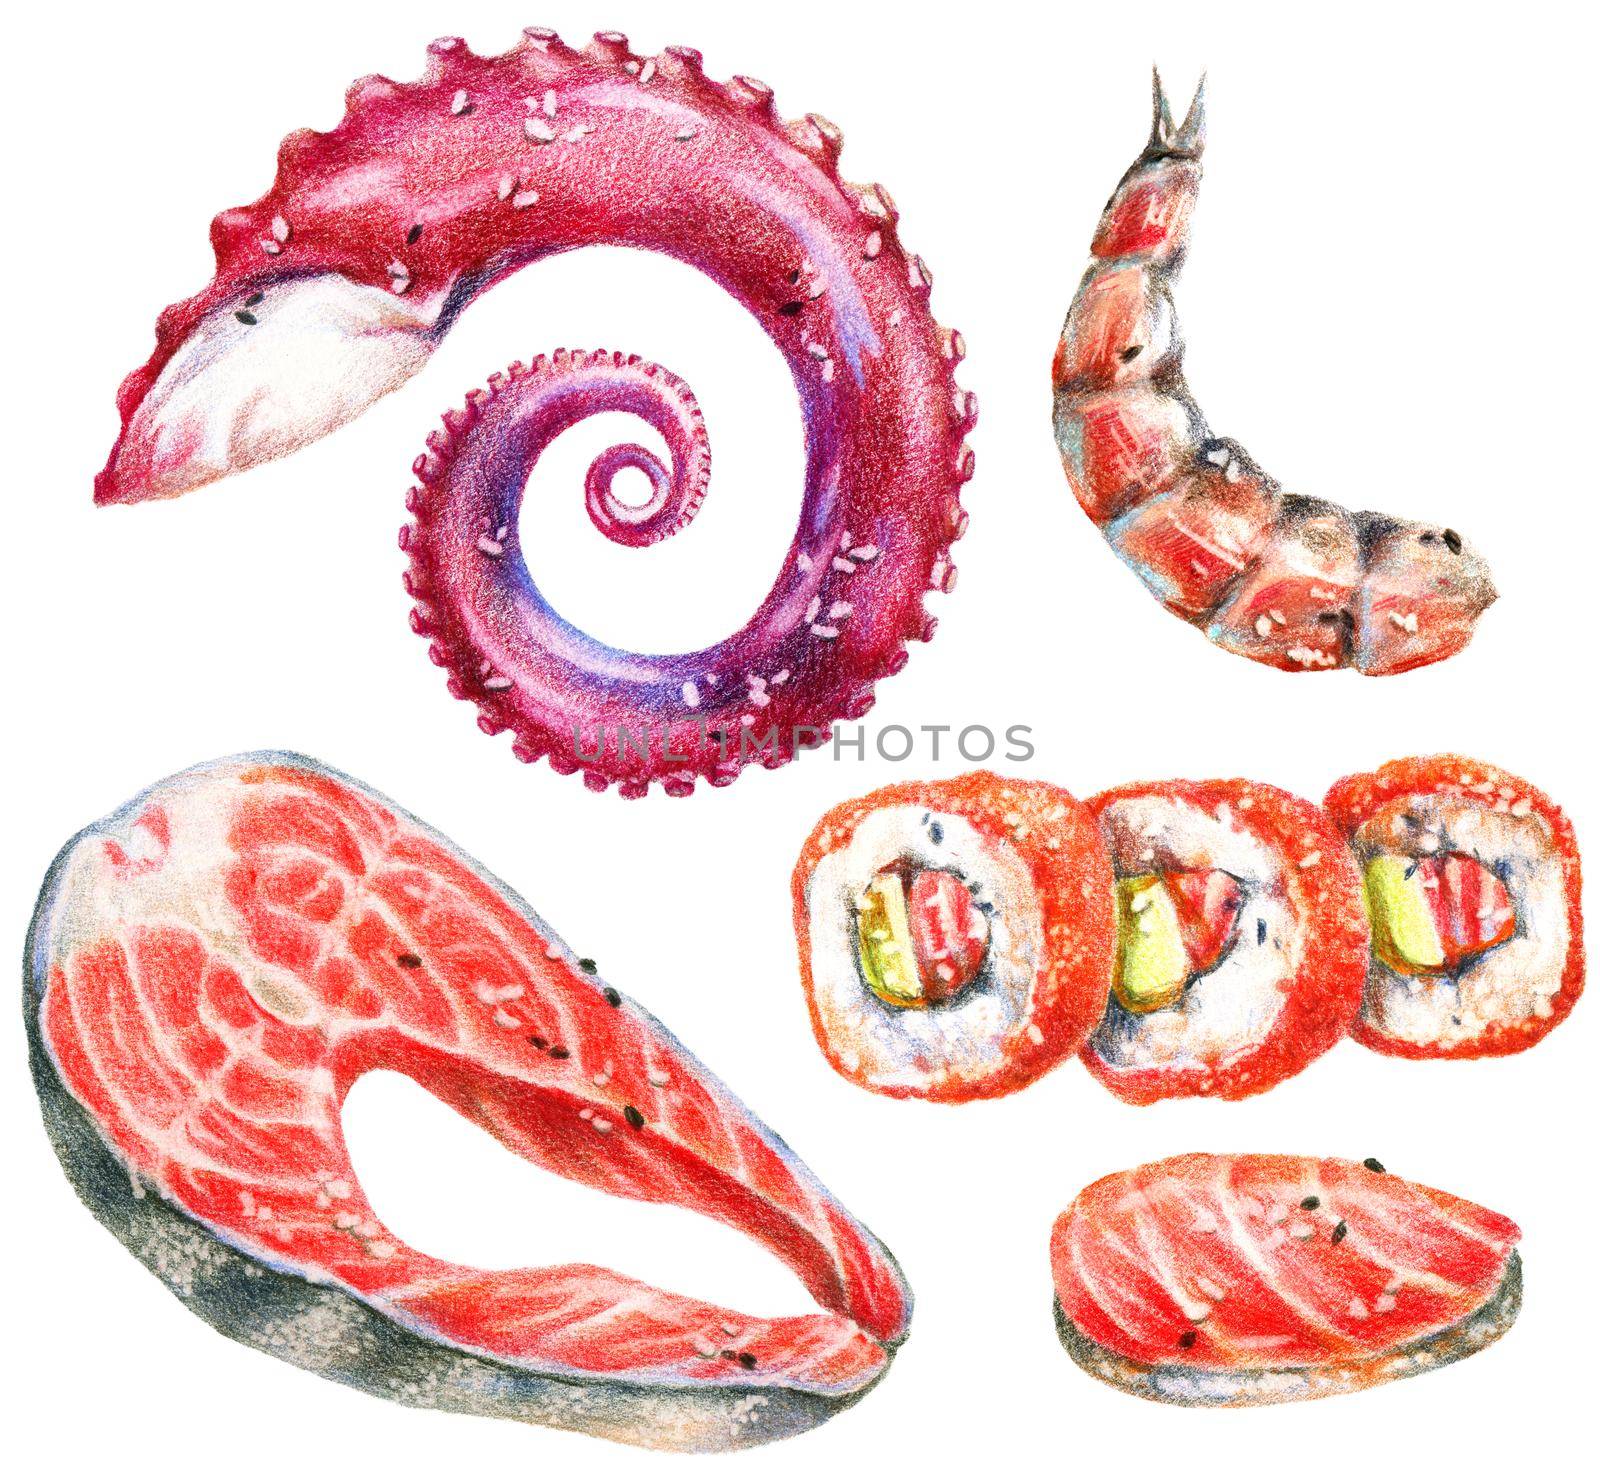 Color pencils realistic illustration of seafood - salmon steak, sushi, rolls, octopus tentacle and shrimp. Hand-drawn objects on white background.